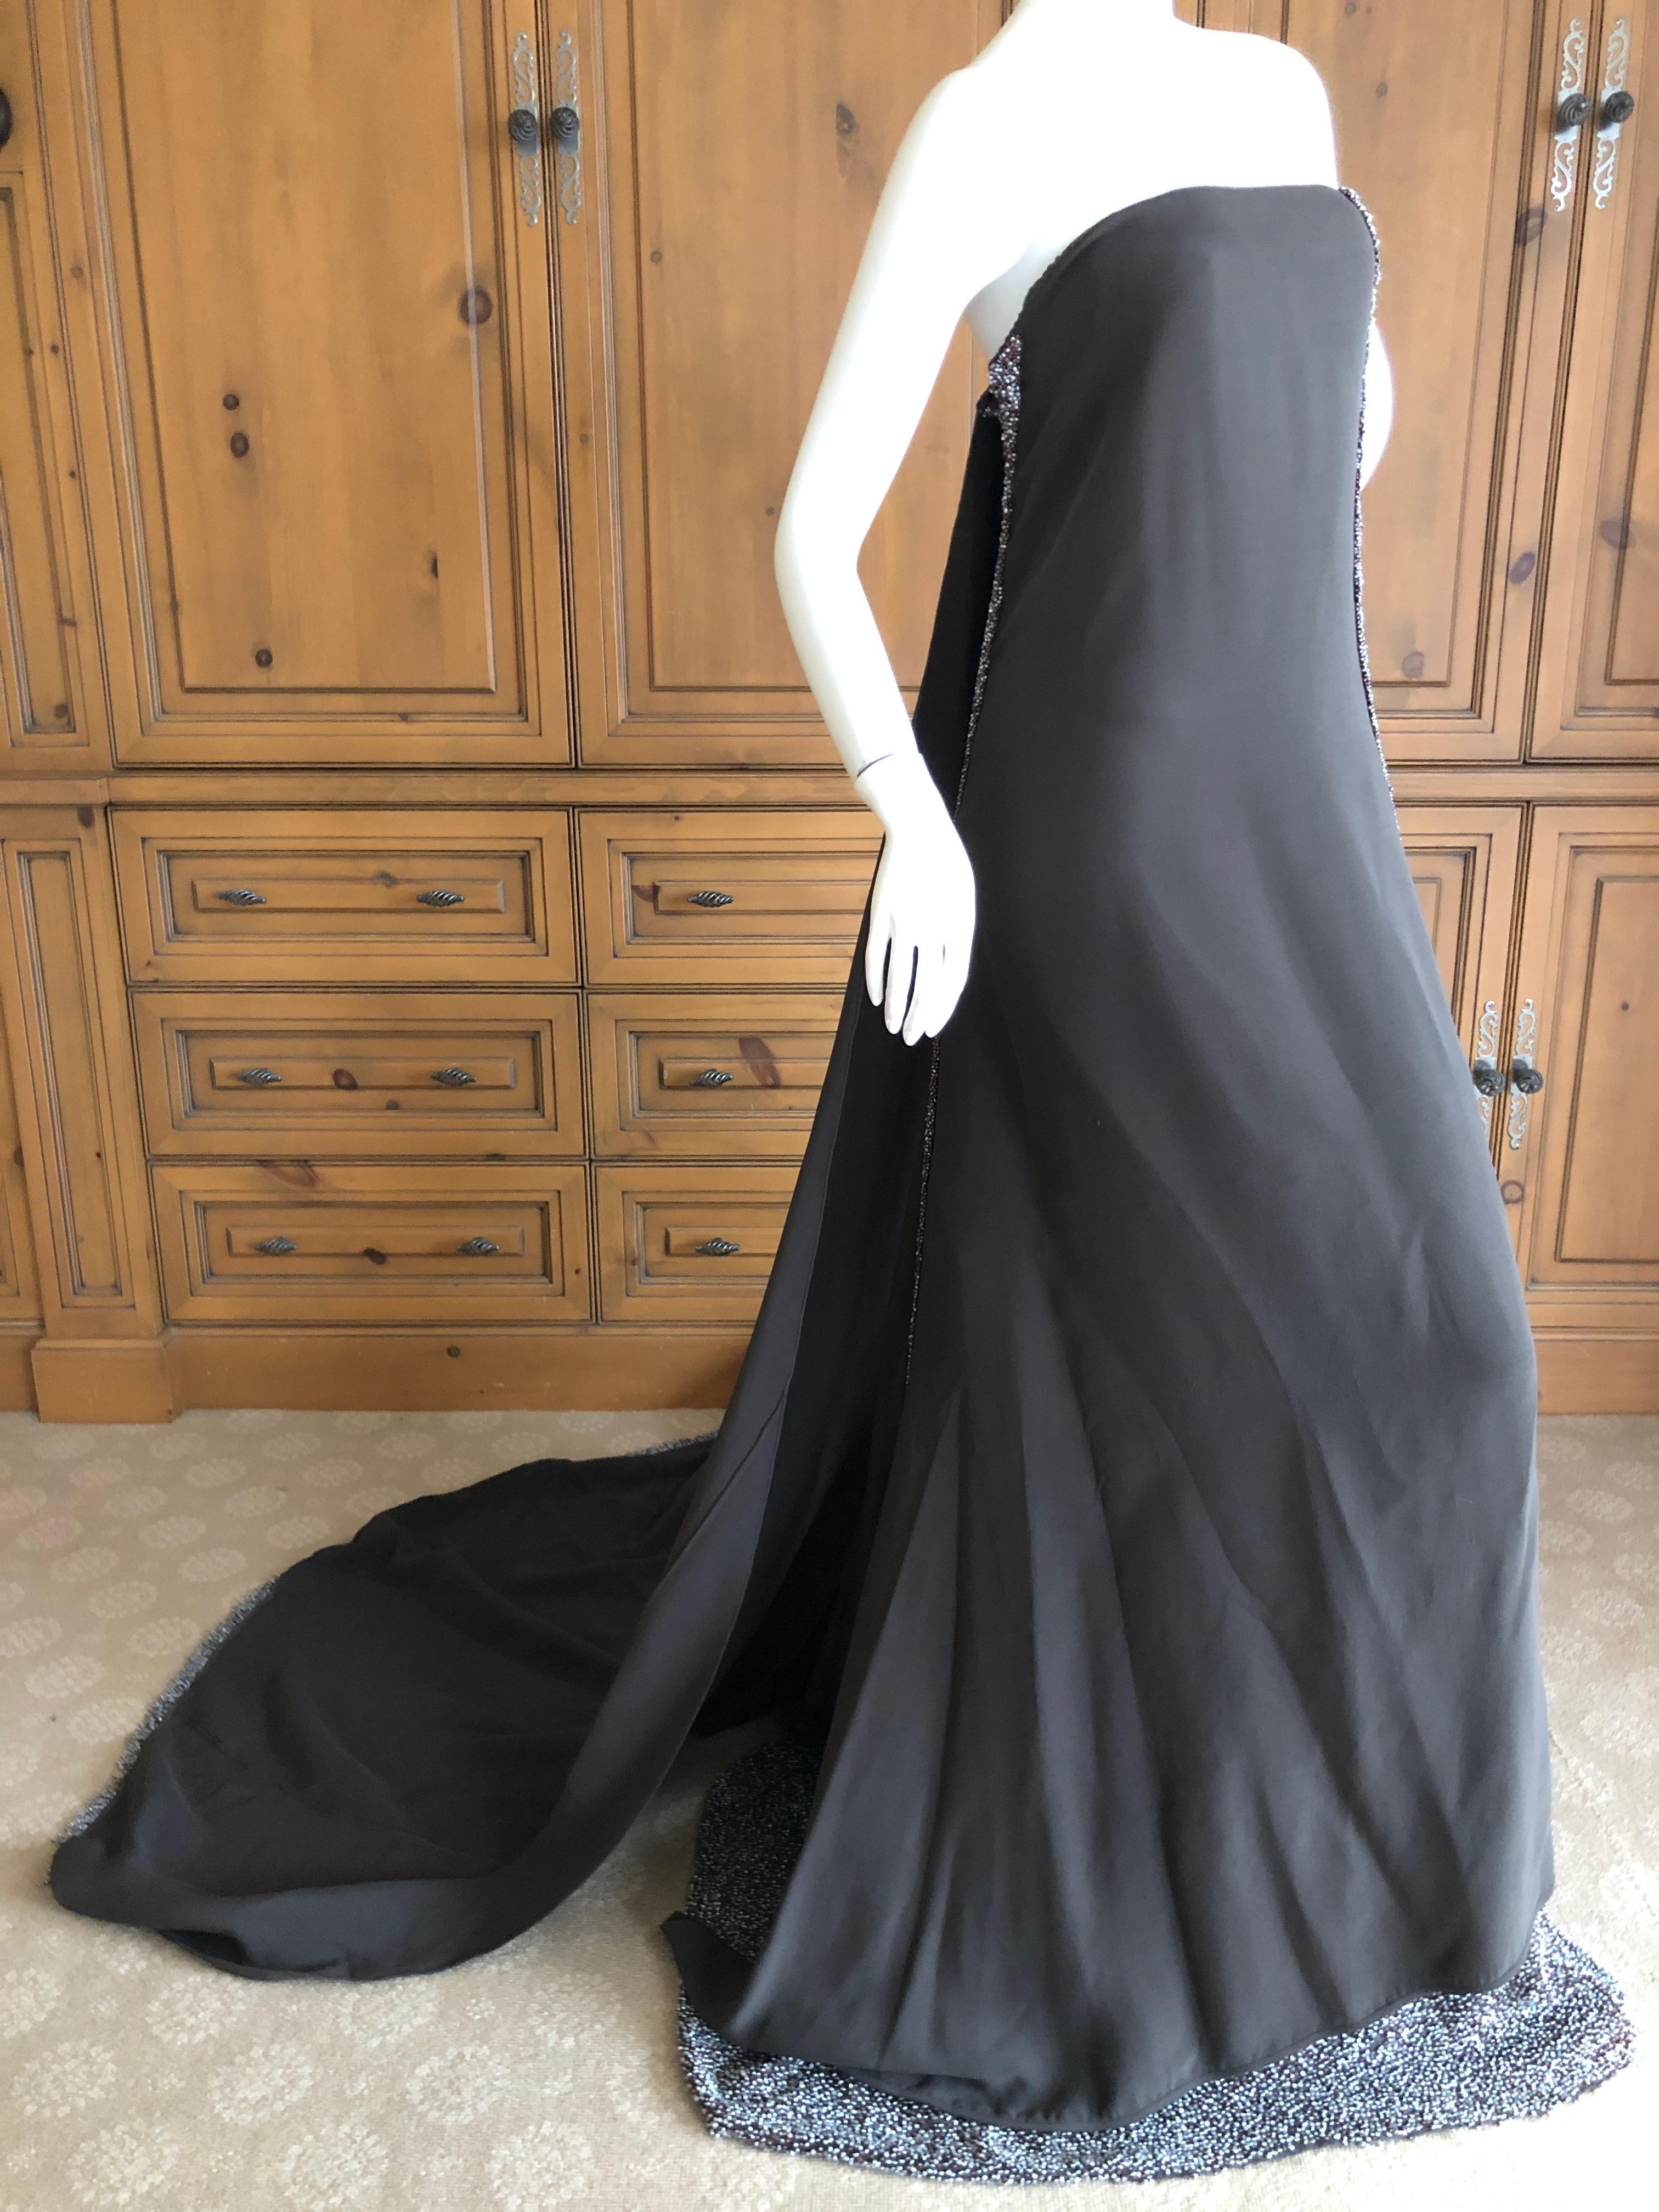 Chado Ralph Rucci Haute Couture Fall 2009 Sari Draped Natural Pearl Trim Dress  In Excellent Condition For Sale In Cloverdale, CA